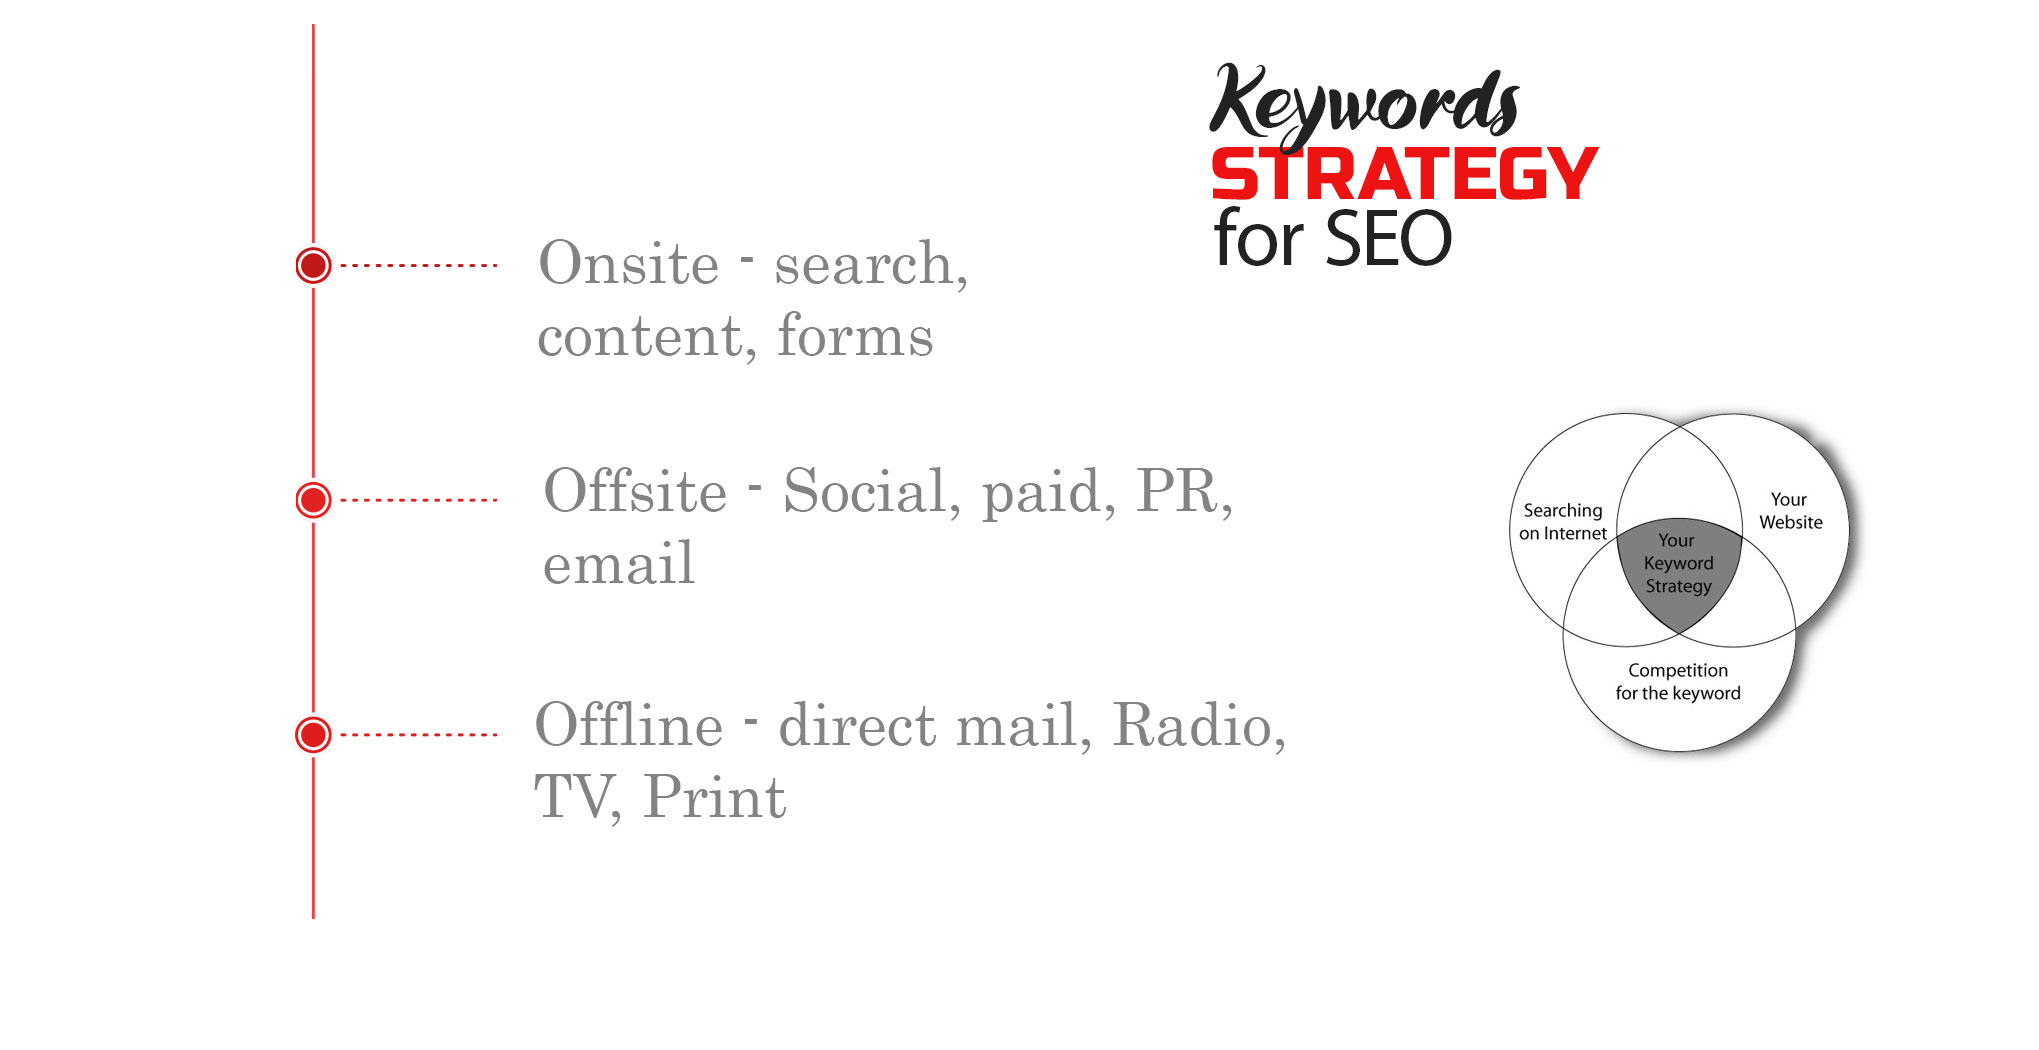 images/Pages/keywords-strategy.jpg